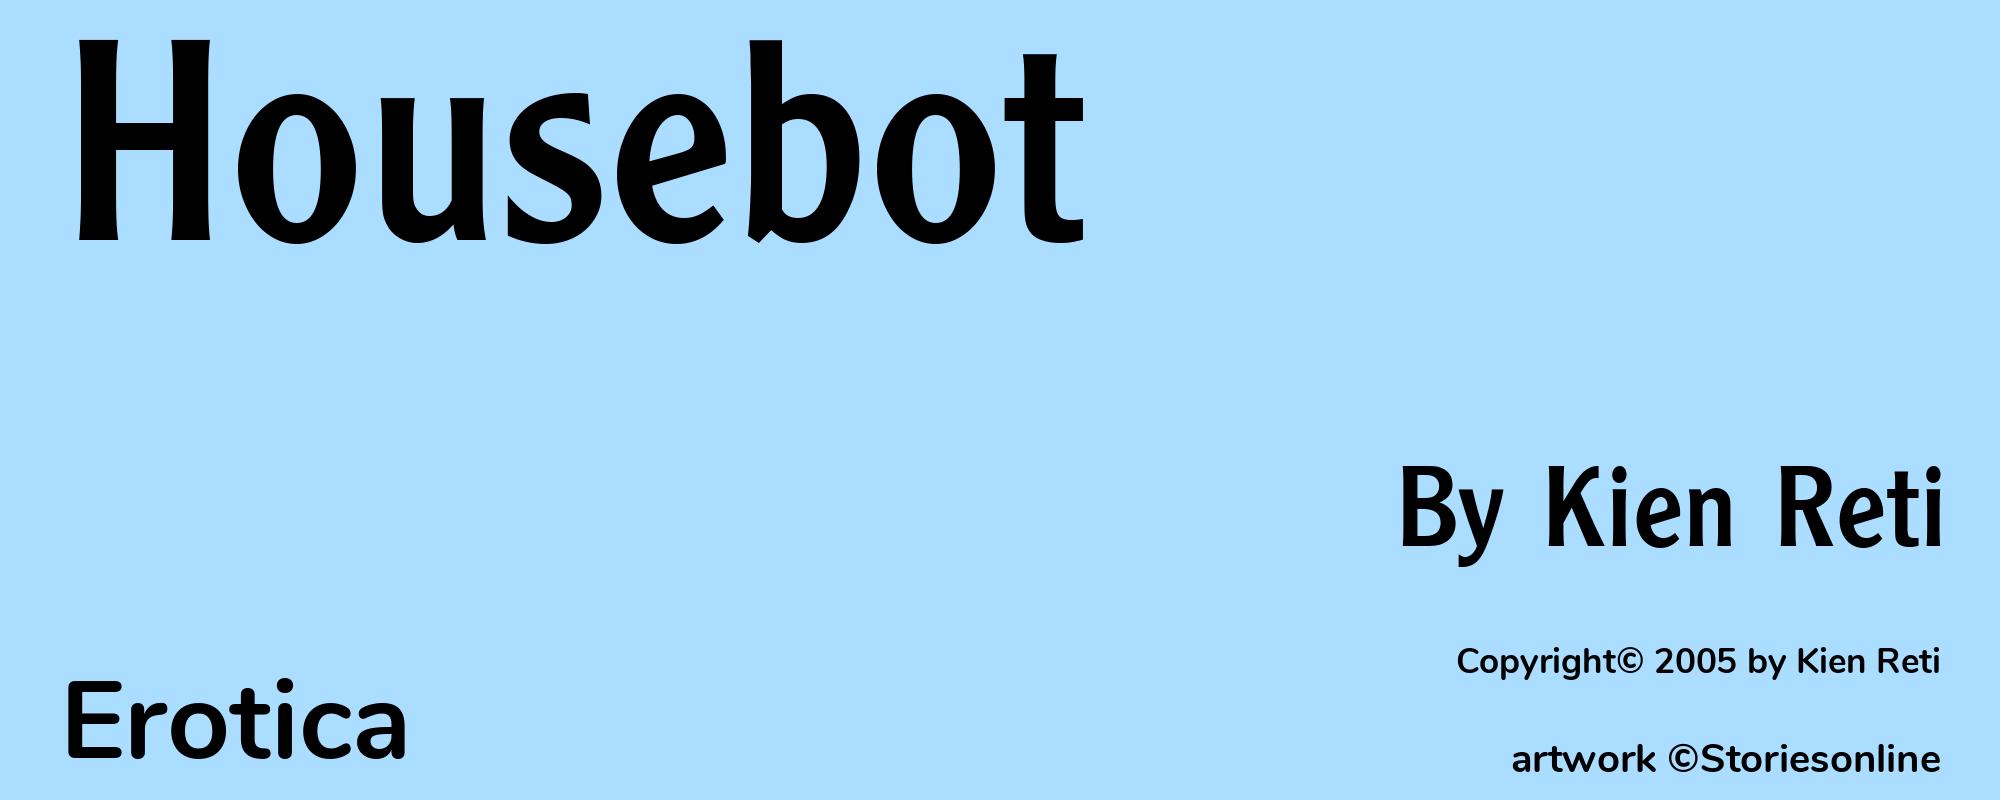 Housebot - Cover